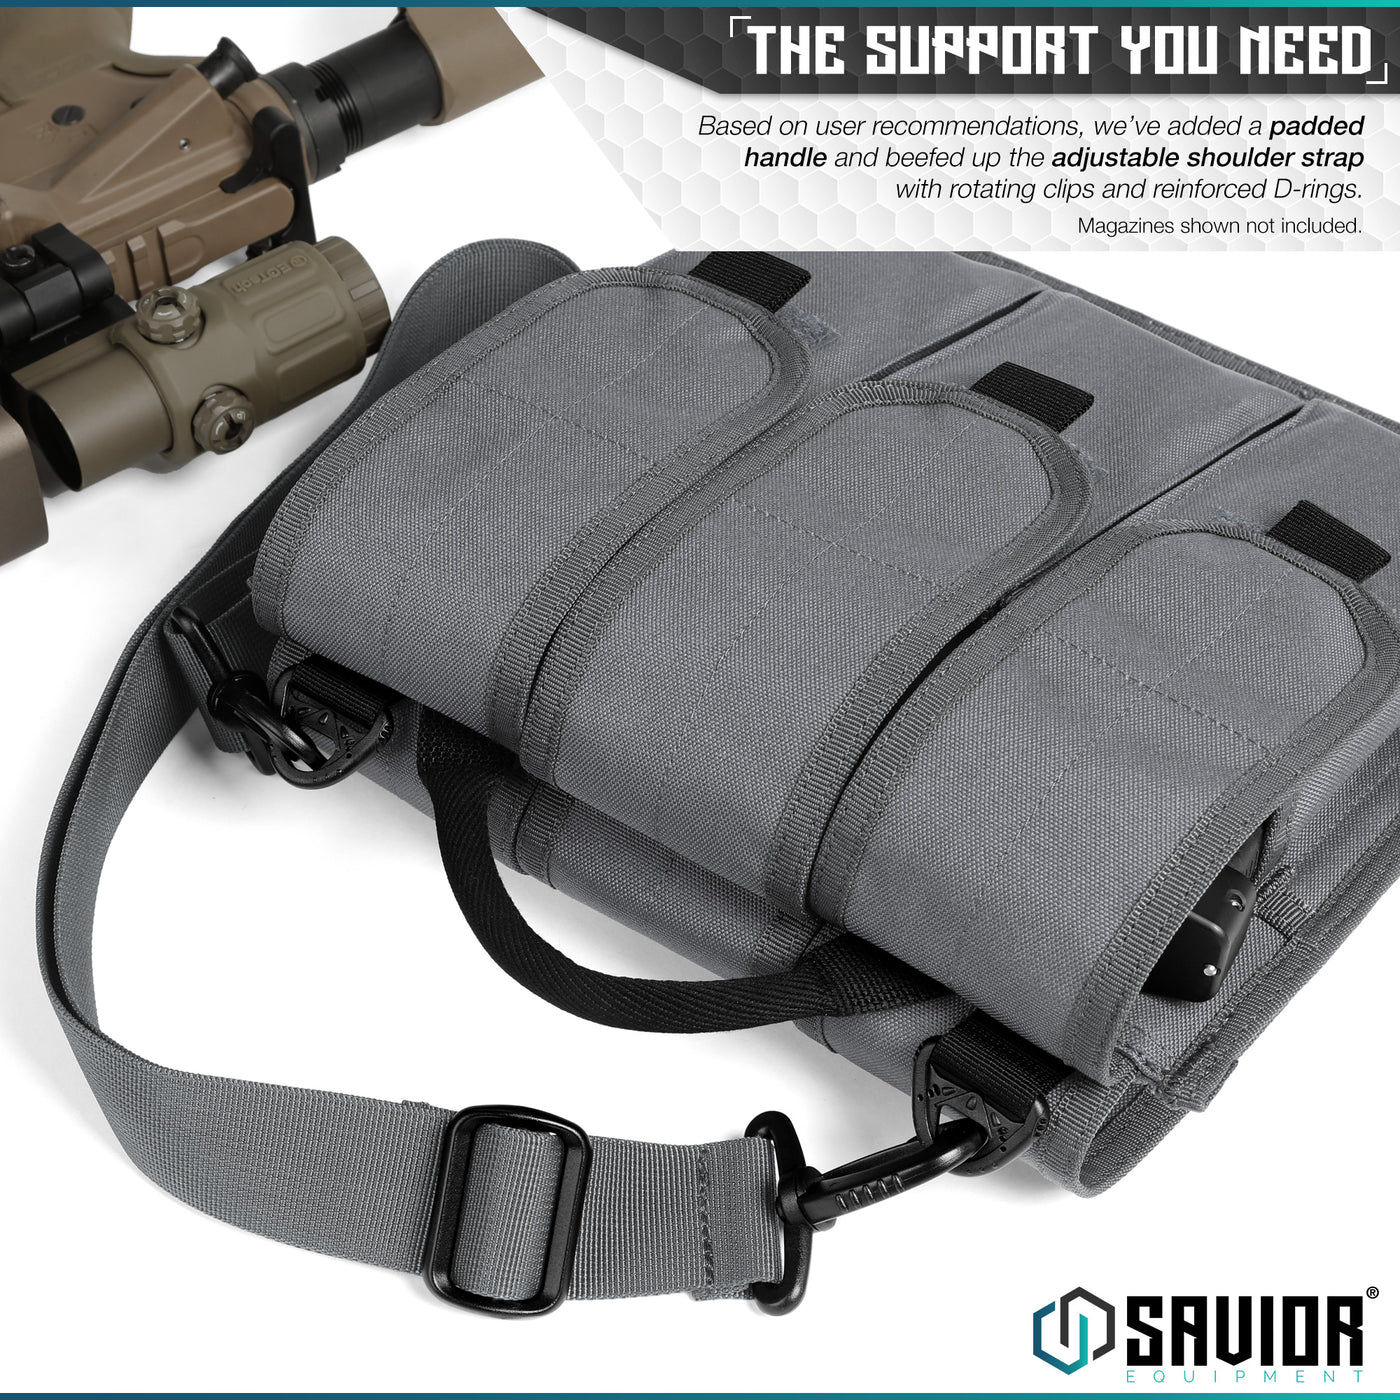 The Support You Need - Based on user recommendations, we've added a padded shoulder strap to prevent the weight of the magazines from digging into your neck.